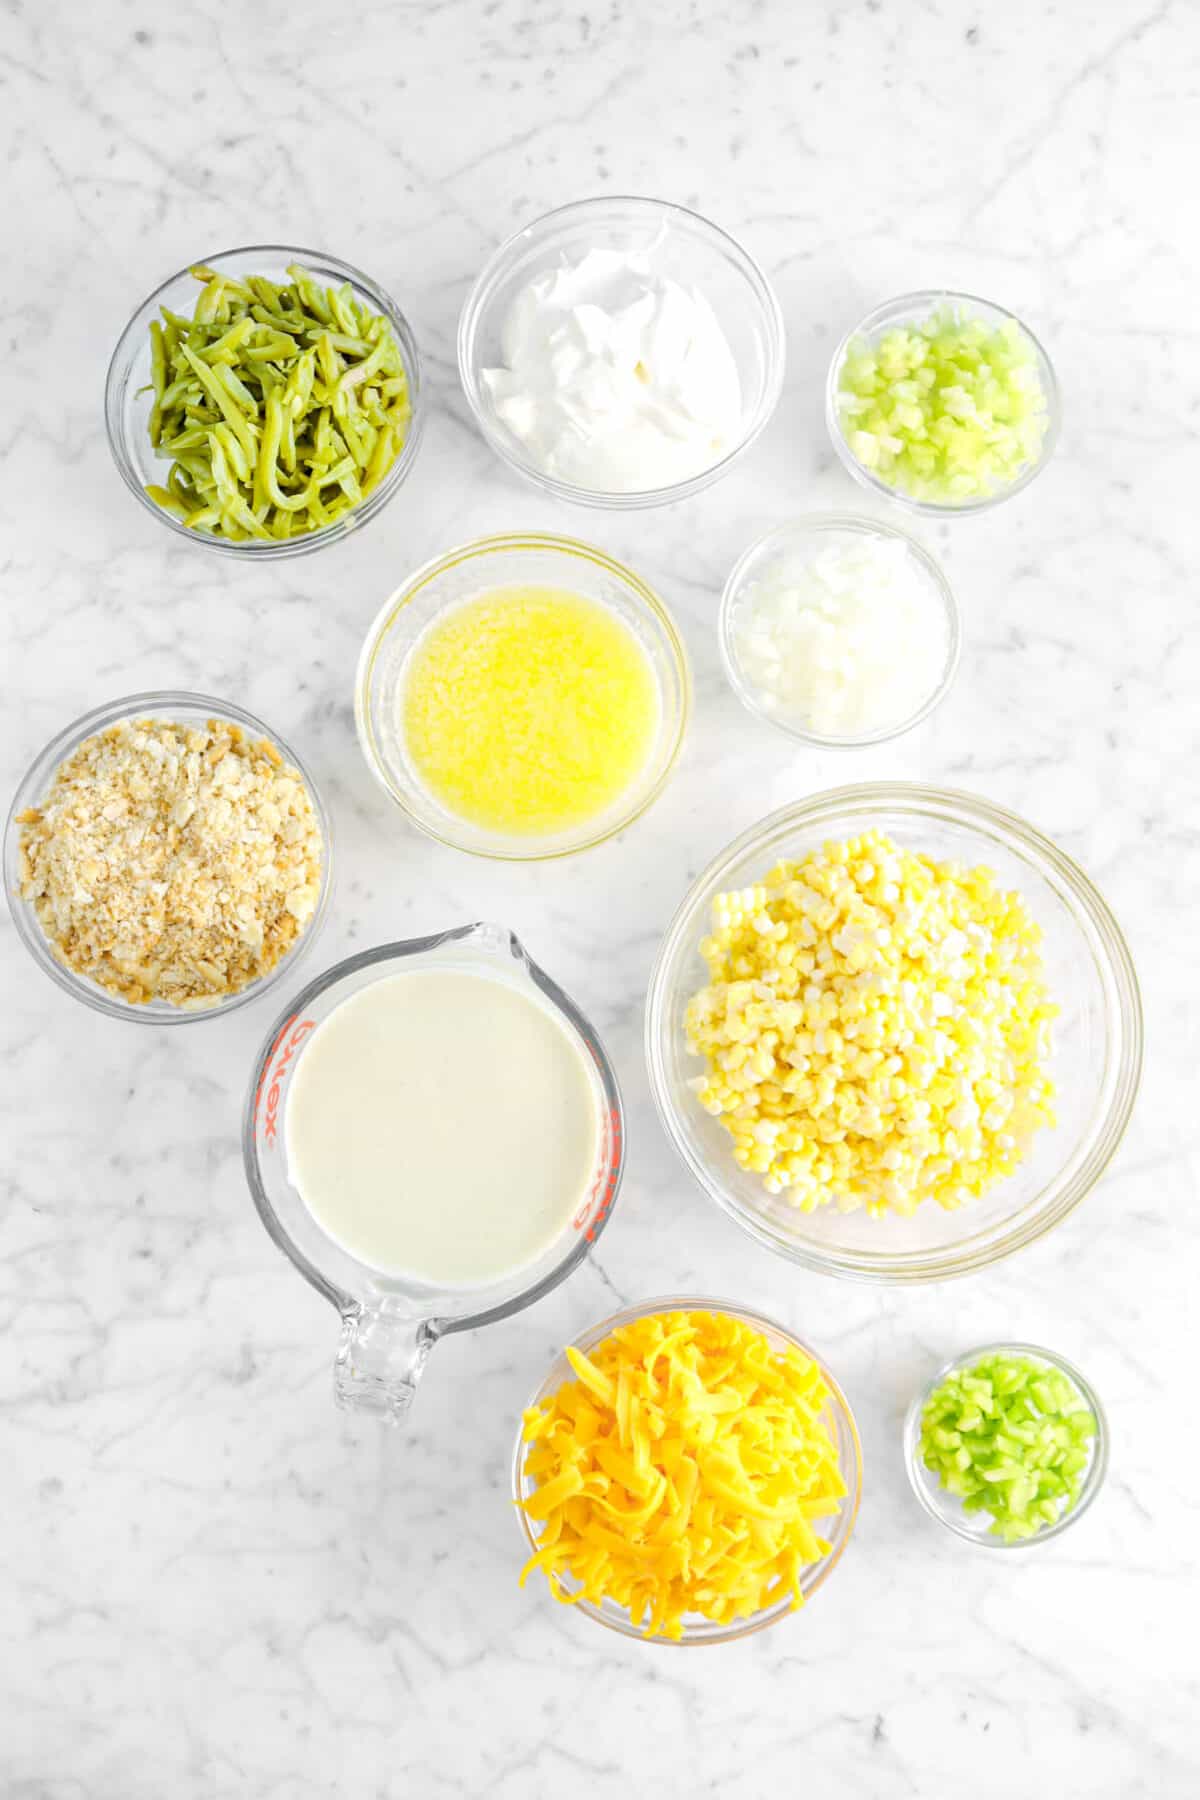 green beans, sour cream, chopped celery, chopped onion, butter, crackers, corn, cream of celery soup, cheddar, and bell pepper in glass bowls